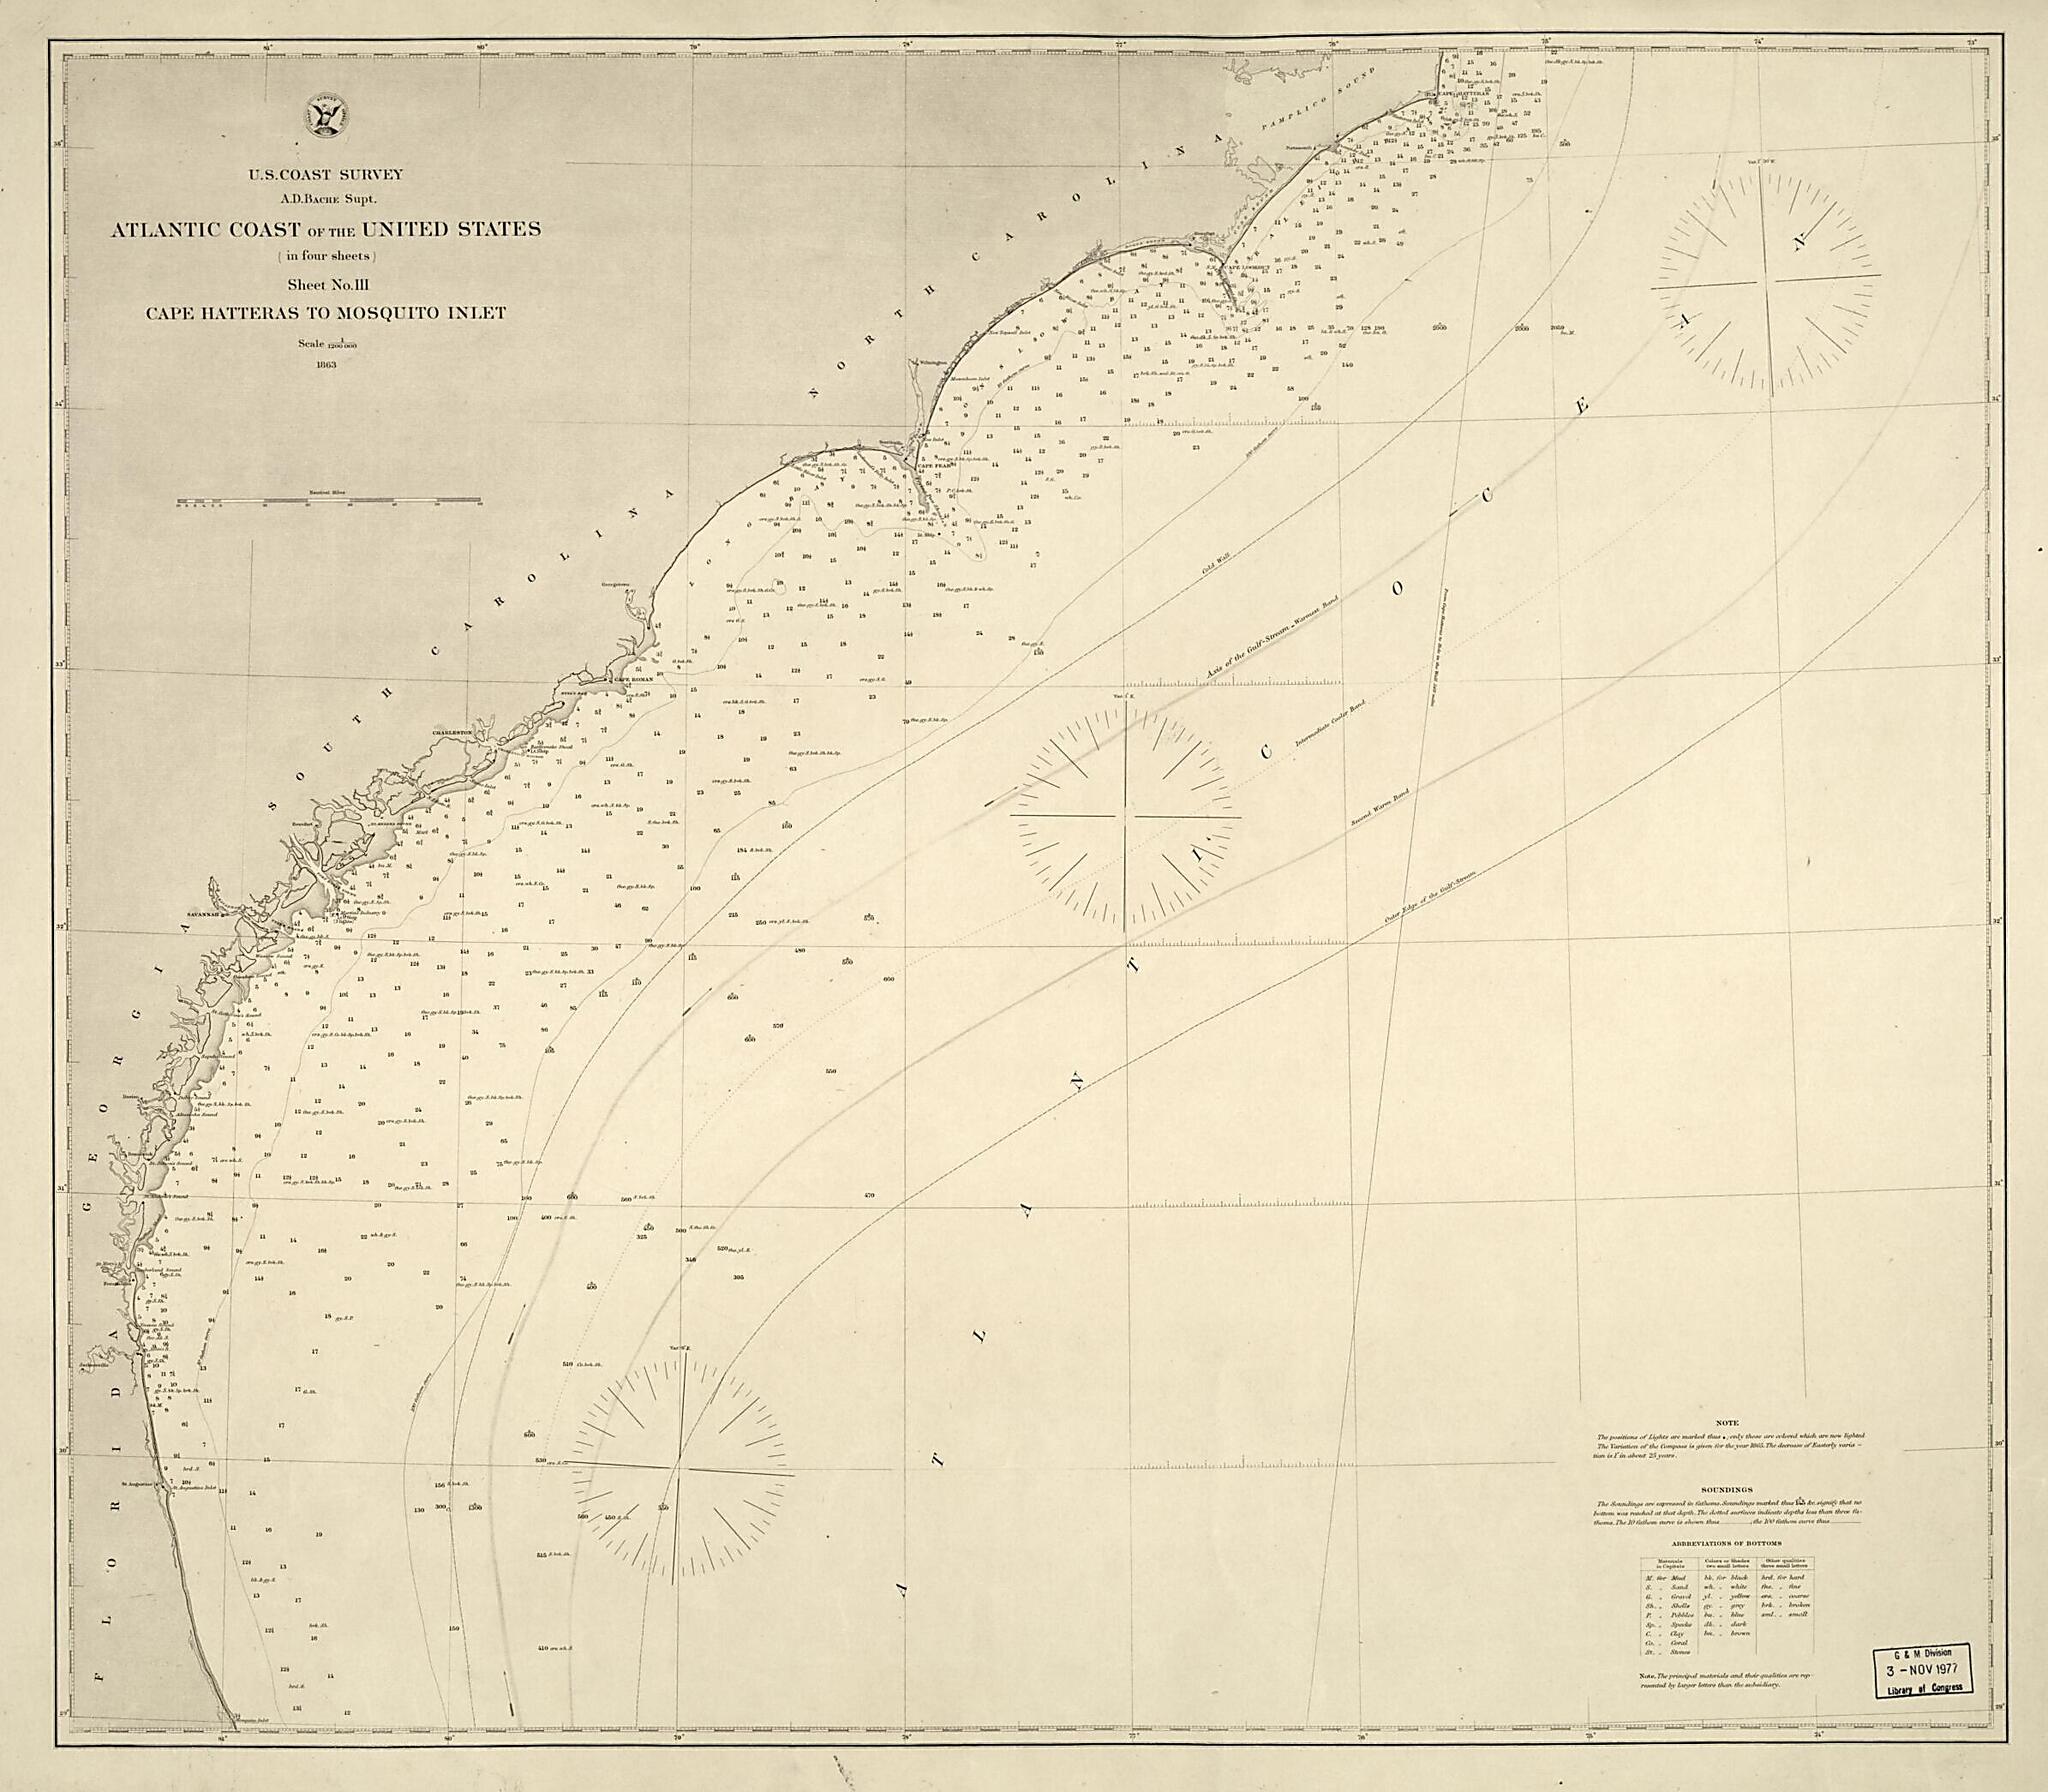 This old map of Atlantic Coast of the United States (in Four Sheets) : Sheet No. III, Cape Hatteras to Mosquito Inlet from 1863 was created by A. D. (Alexander Dallas) Bache,  United States Coast Survey in 1863